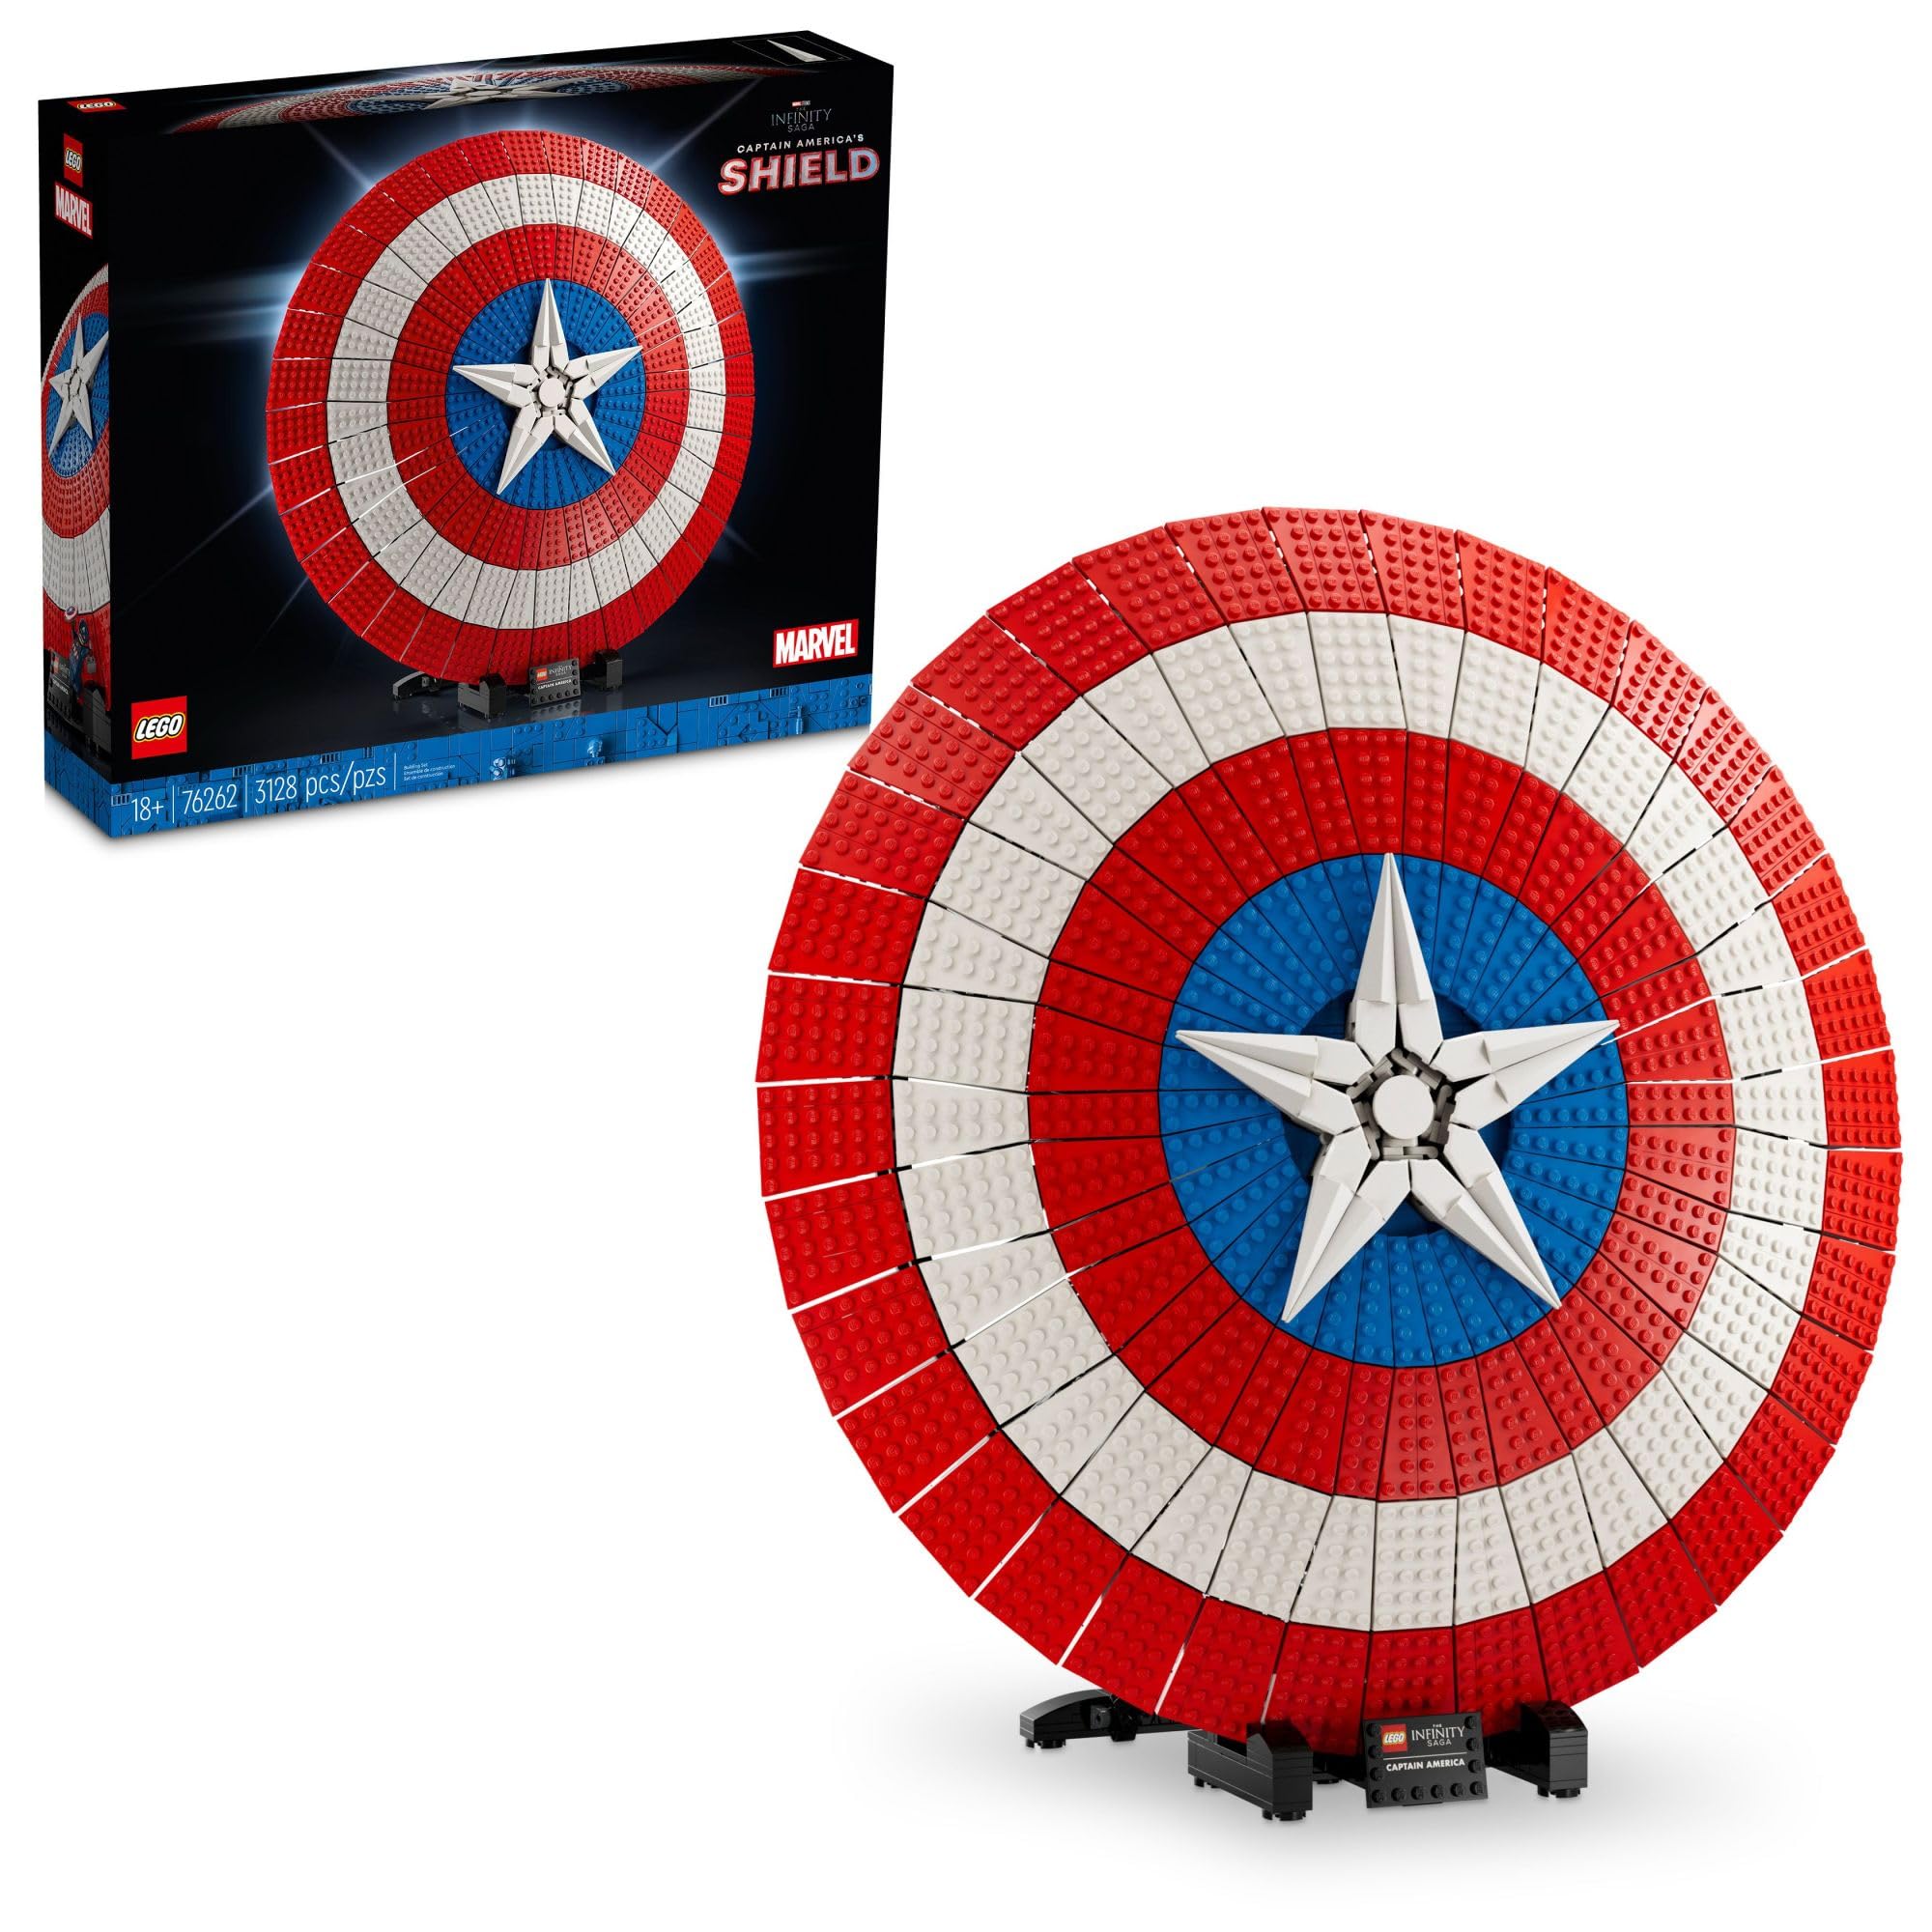  LEGO Marvel Captain America’s Shield 76262 Model Kit for Adults, Collectible Replica of Captain America’s Iconic Shield, This Disney Marvel Building Set for Adults Makes a Great Gift for Marvel...